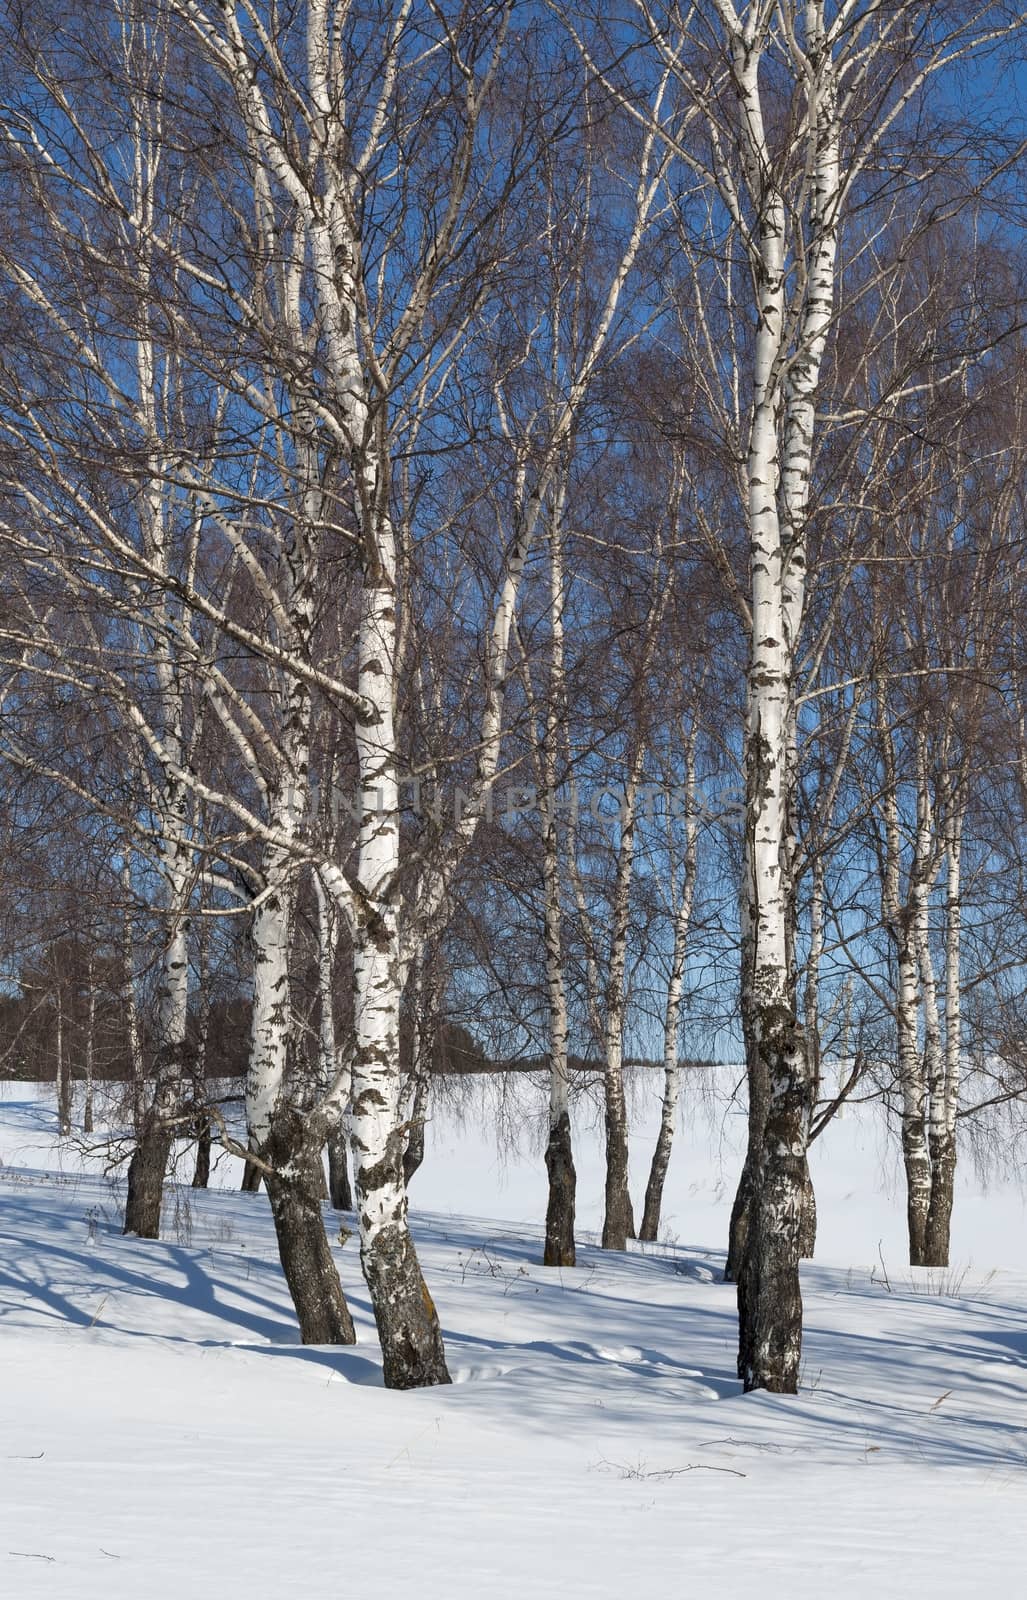 Group of bare birches in early spring, sunny day